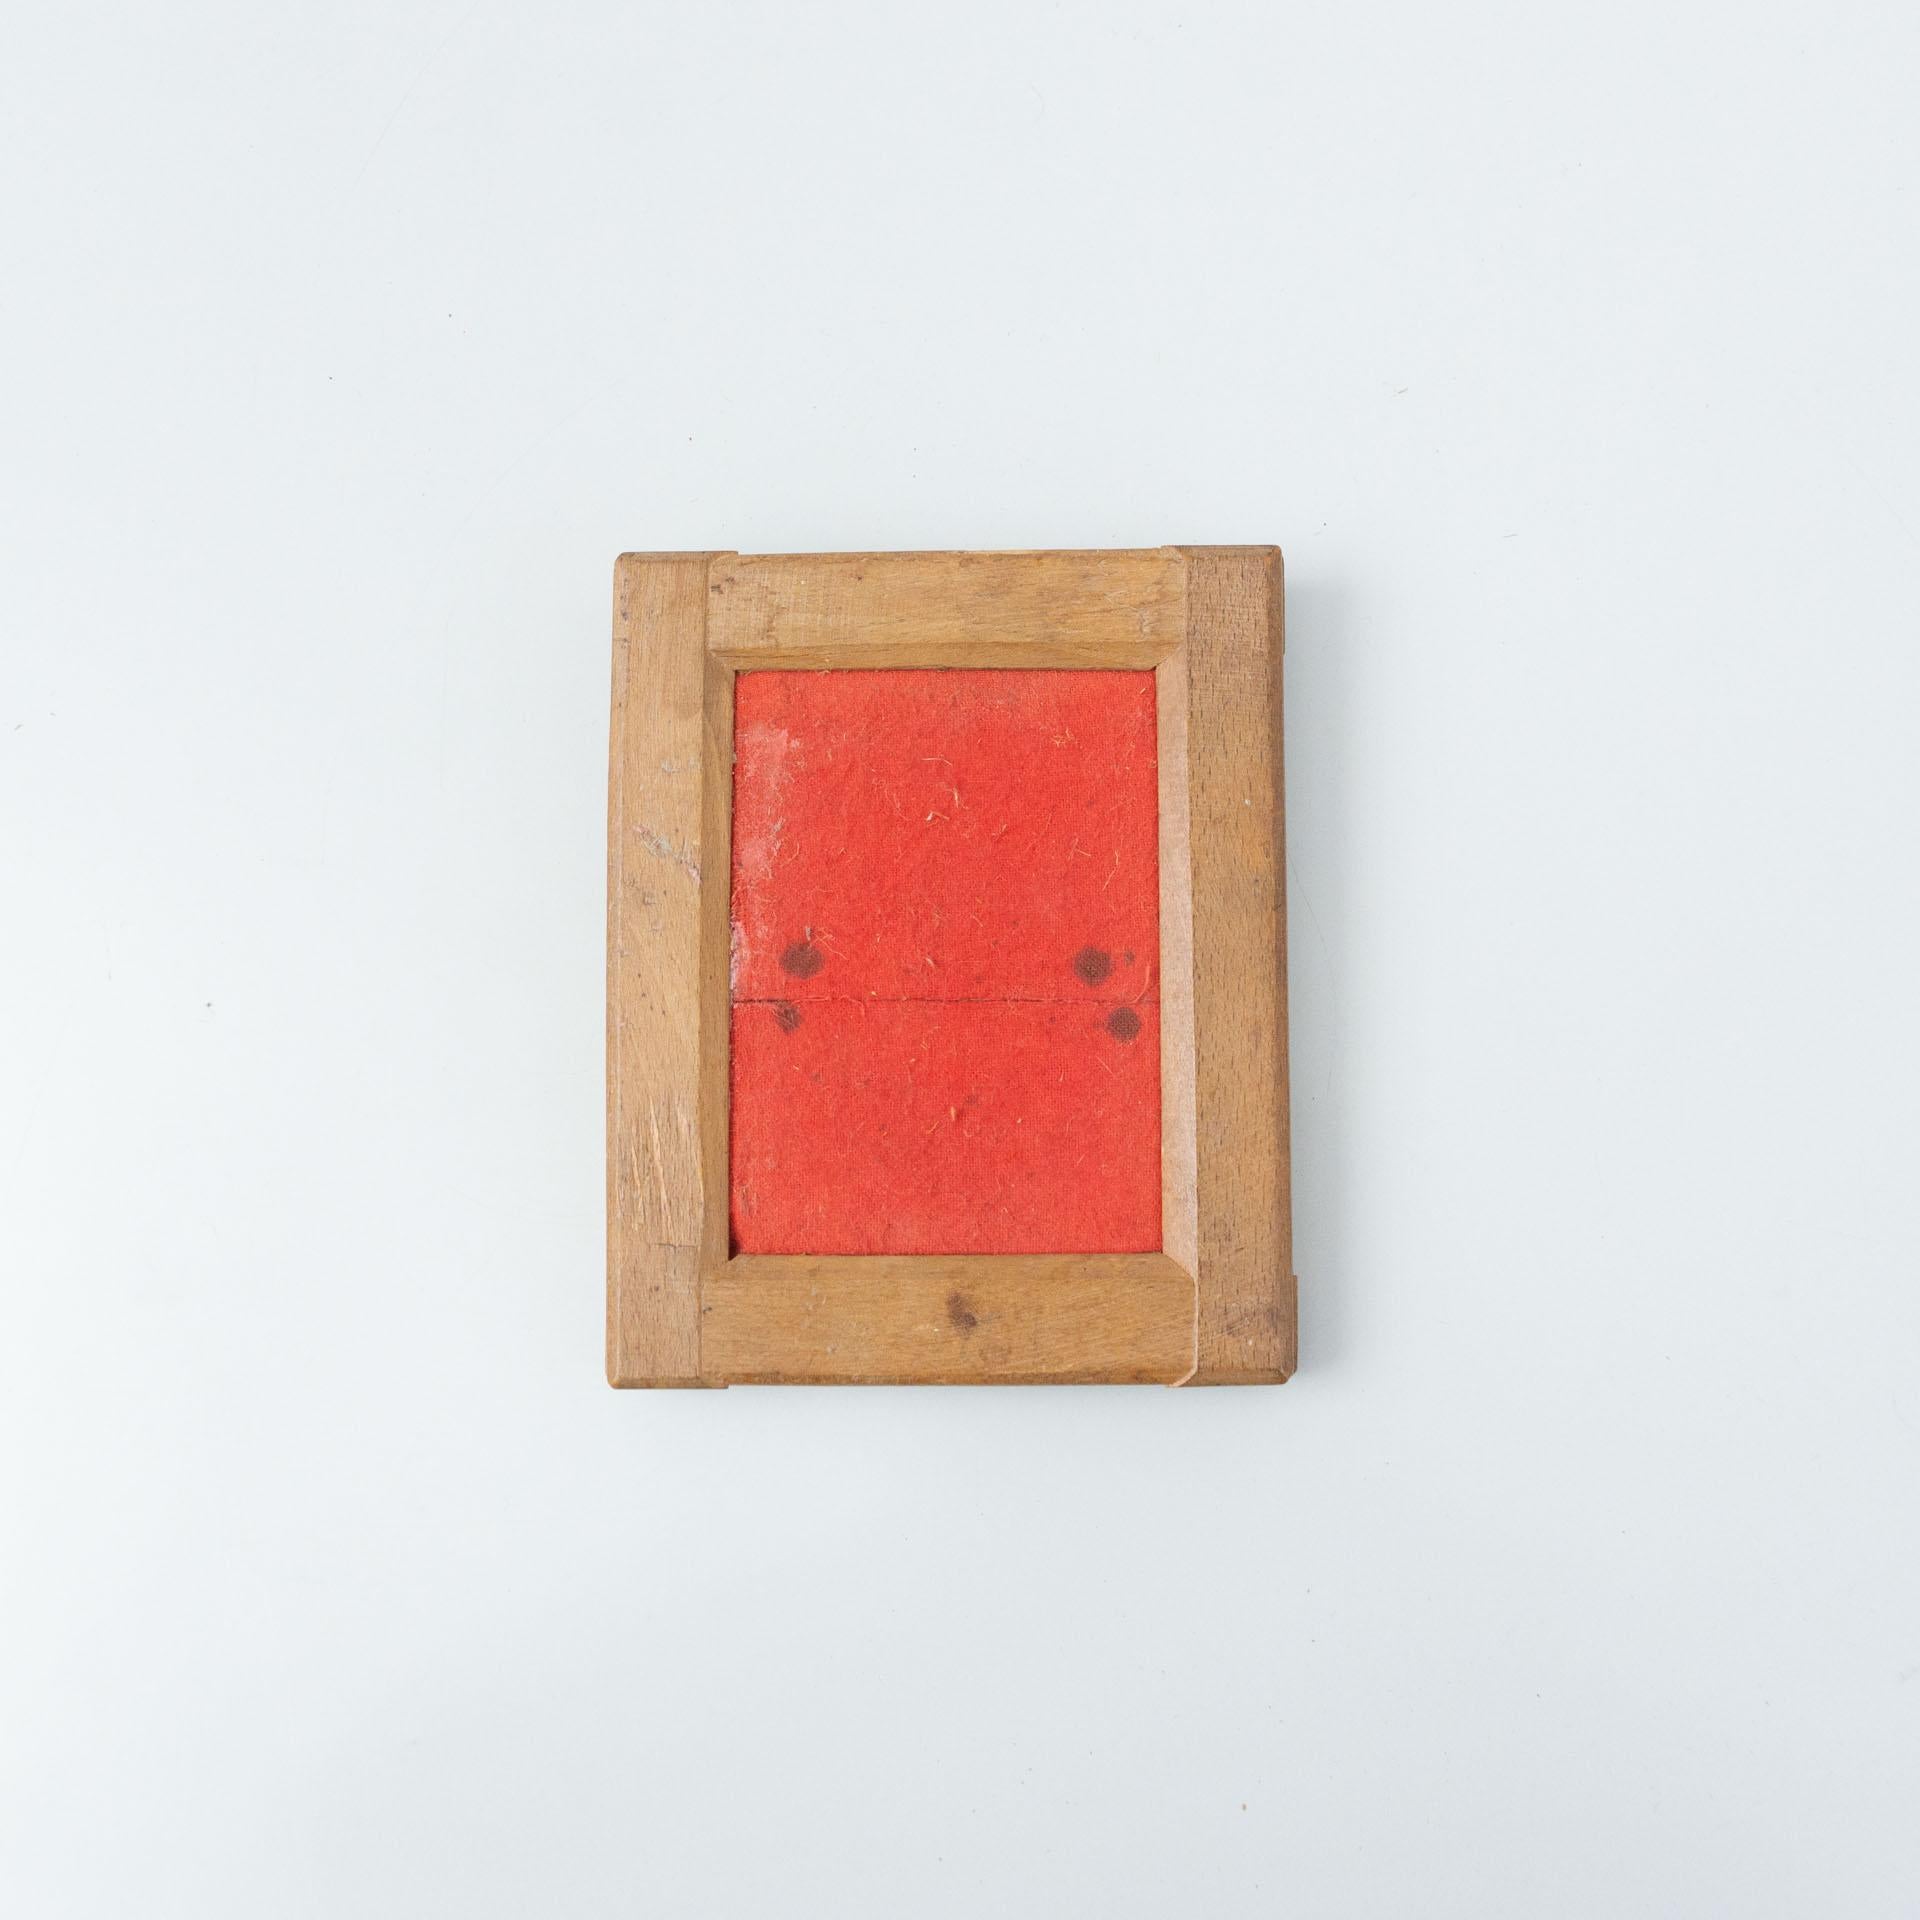 Antique wood frame with red felt interior.
By unnknown artist, circa 1940.

In original condition, with minor wear consistent with age and use, preserving a beautiful patina.

Materials:
Wood
Felt

Dimensions (each one):
D 2 cm x W 13.5 cm